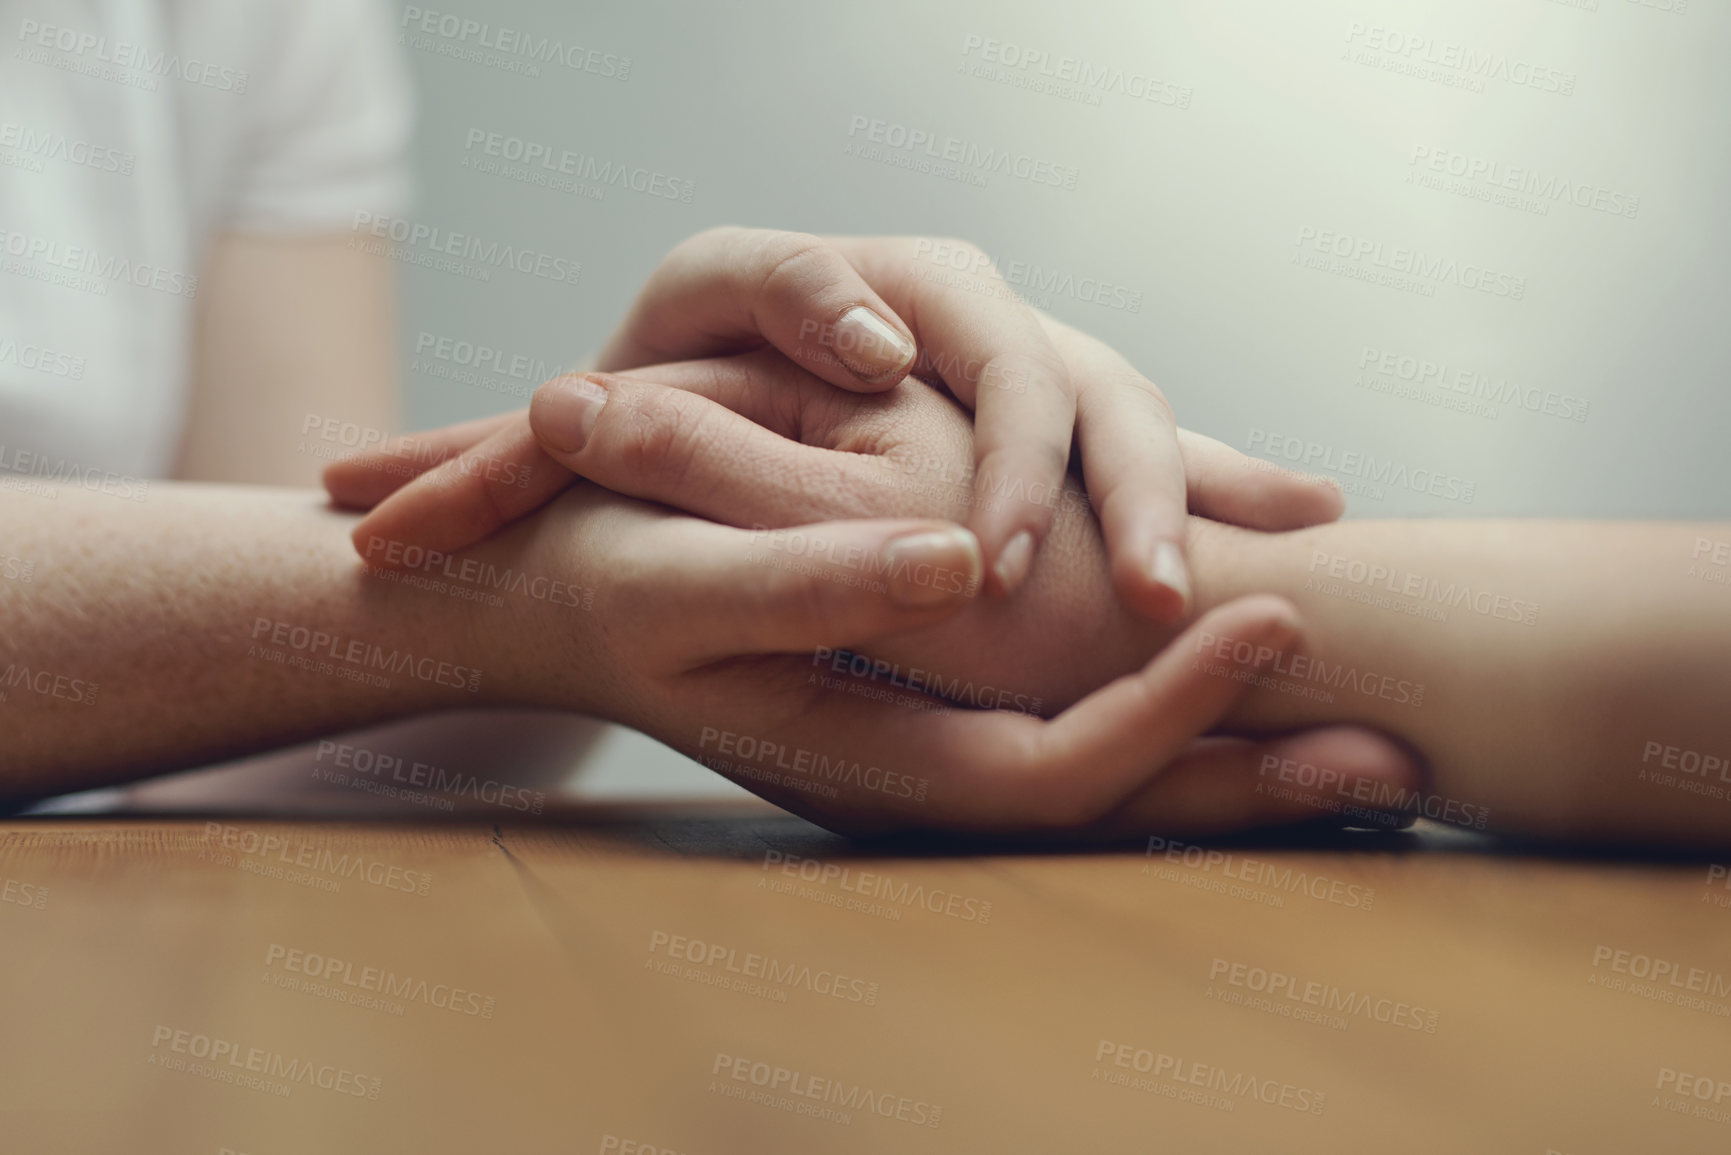 Buy stock photo Cropped shot of two people holding hands in comfort